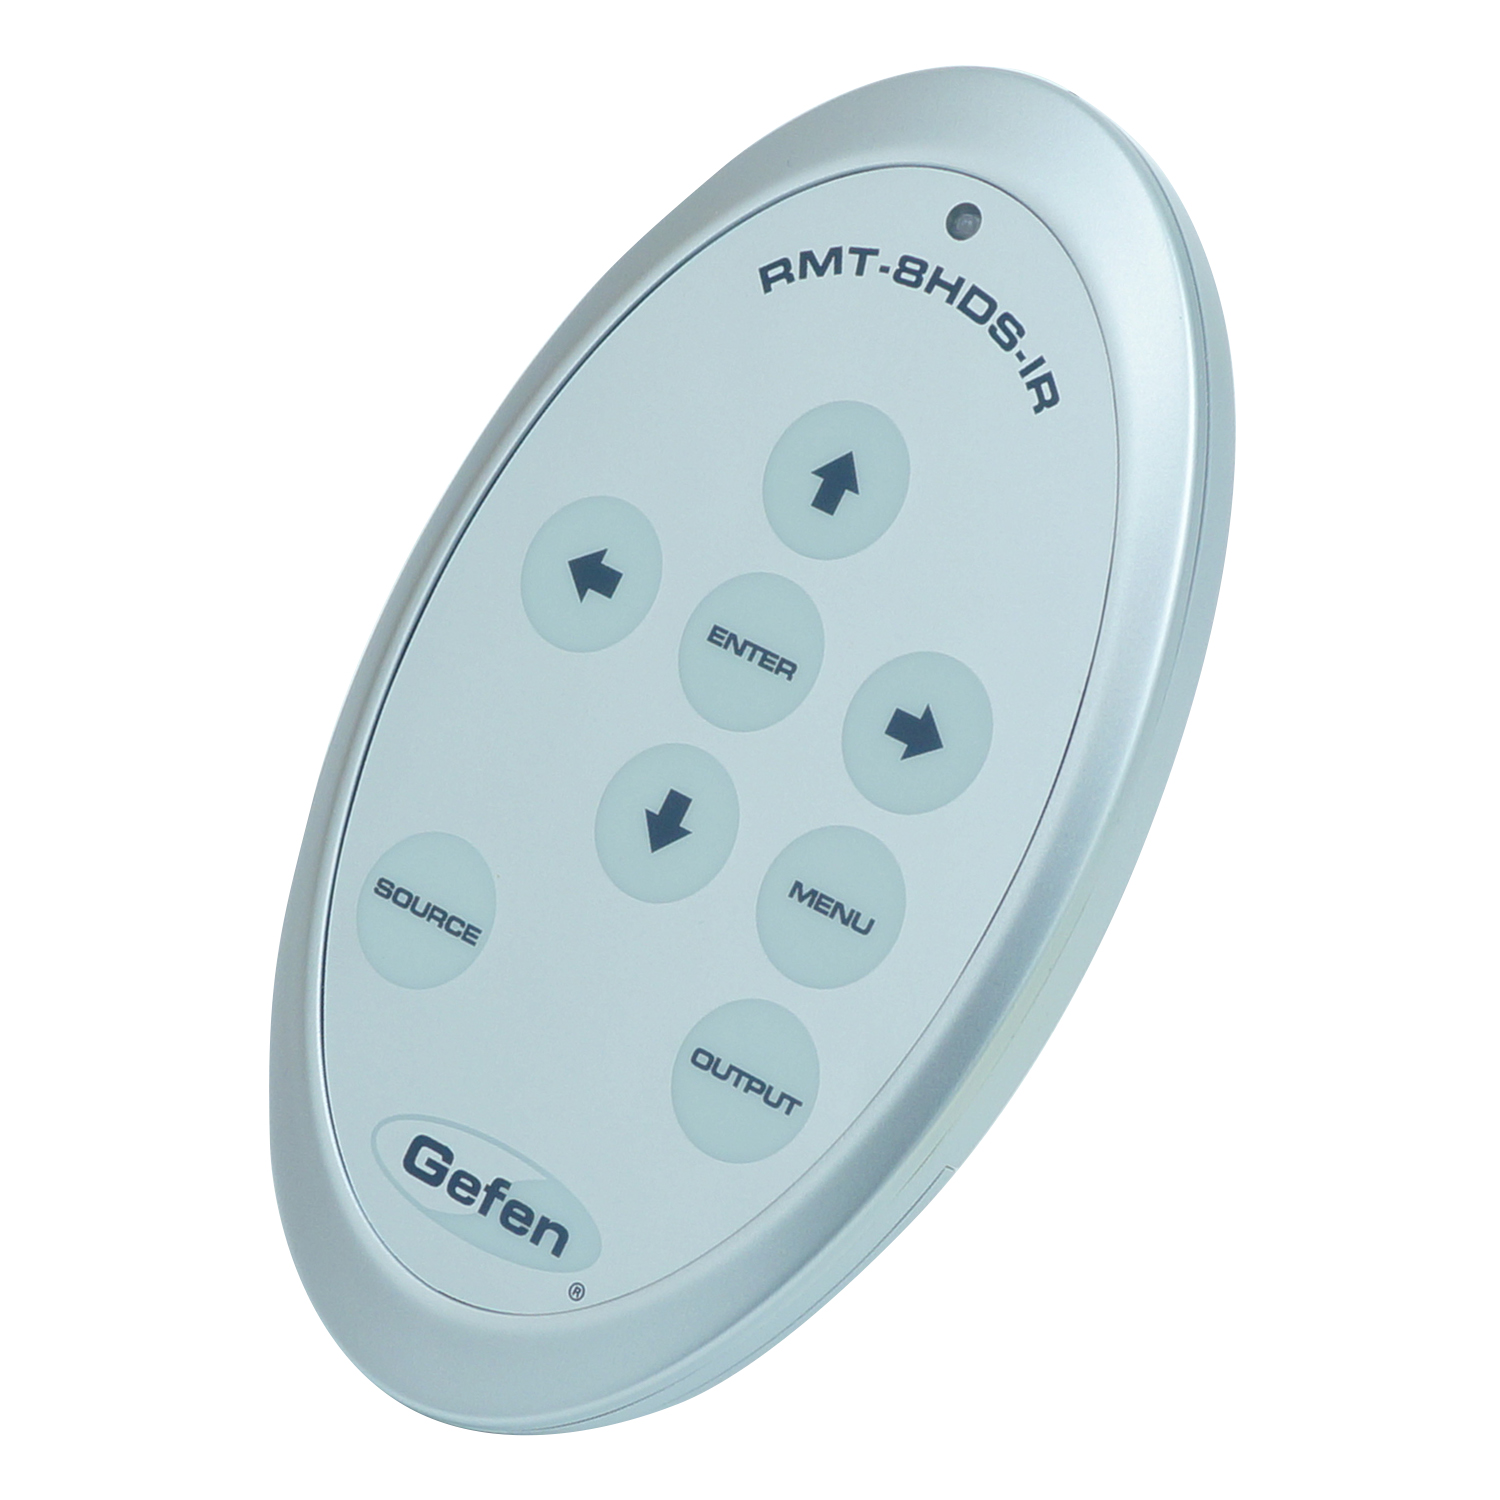 RMT-8HDS-IRN IR Remote Control for HD-/3G-SDI Converter/Scaler Products by Gefen